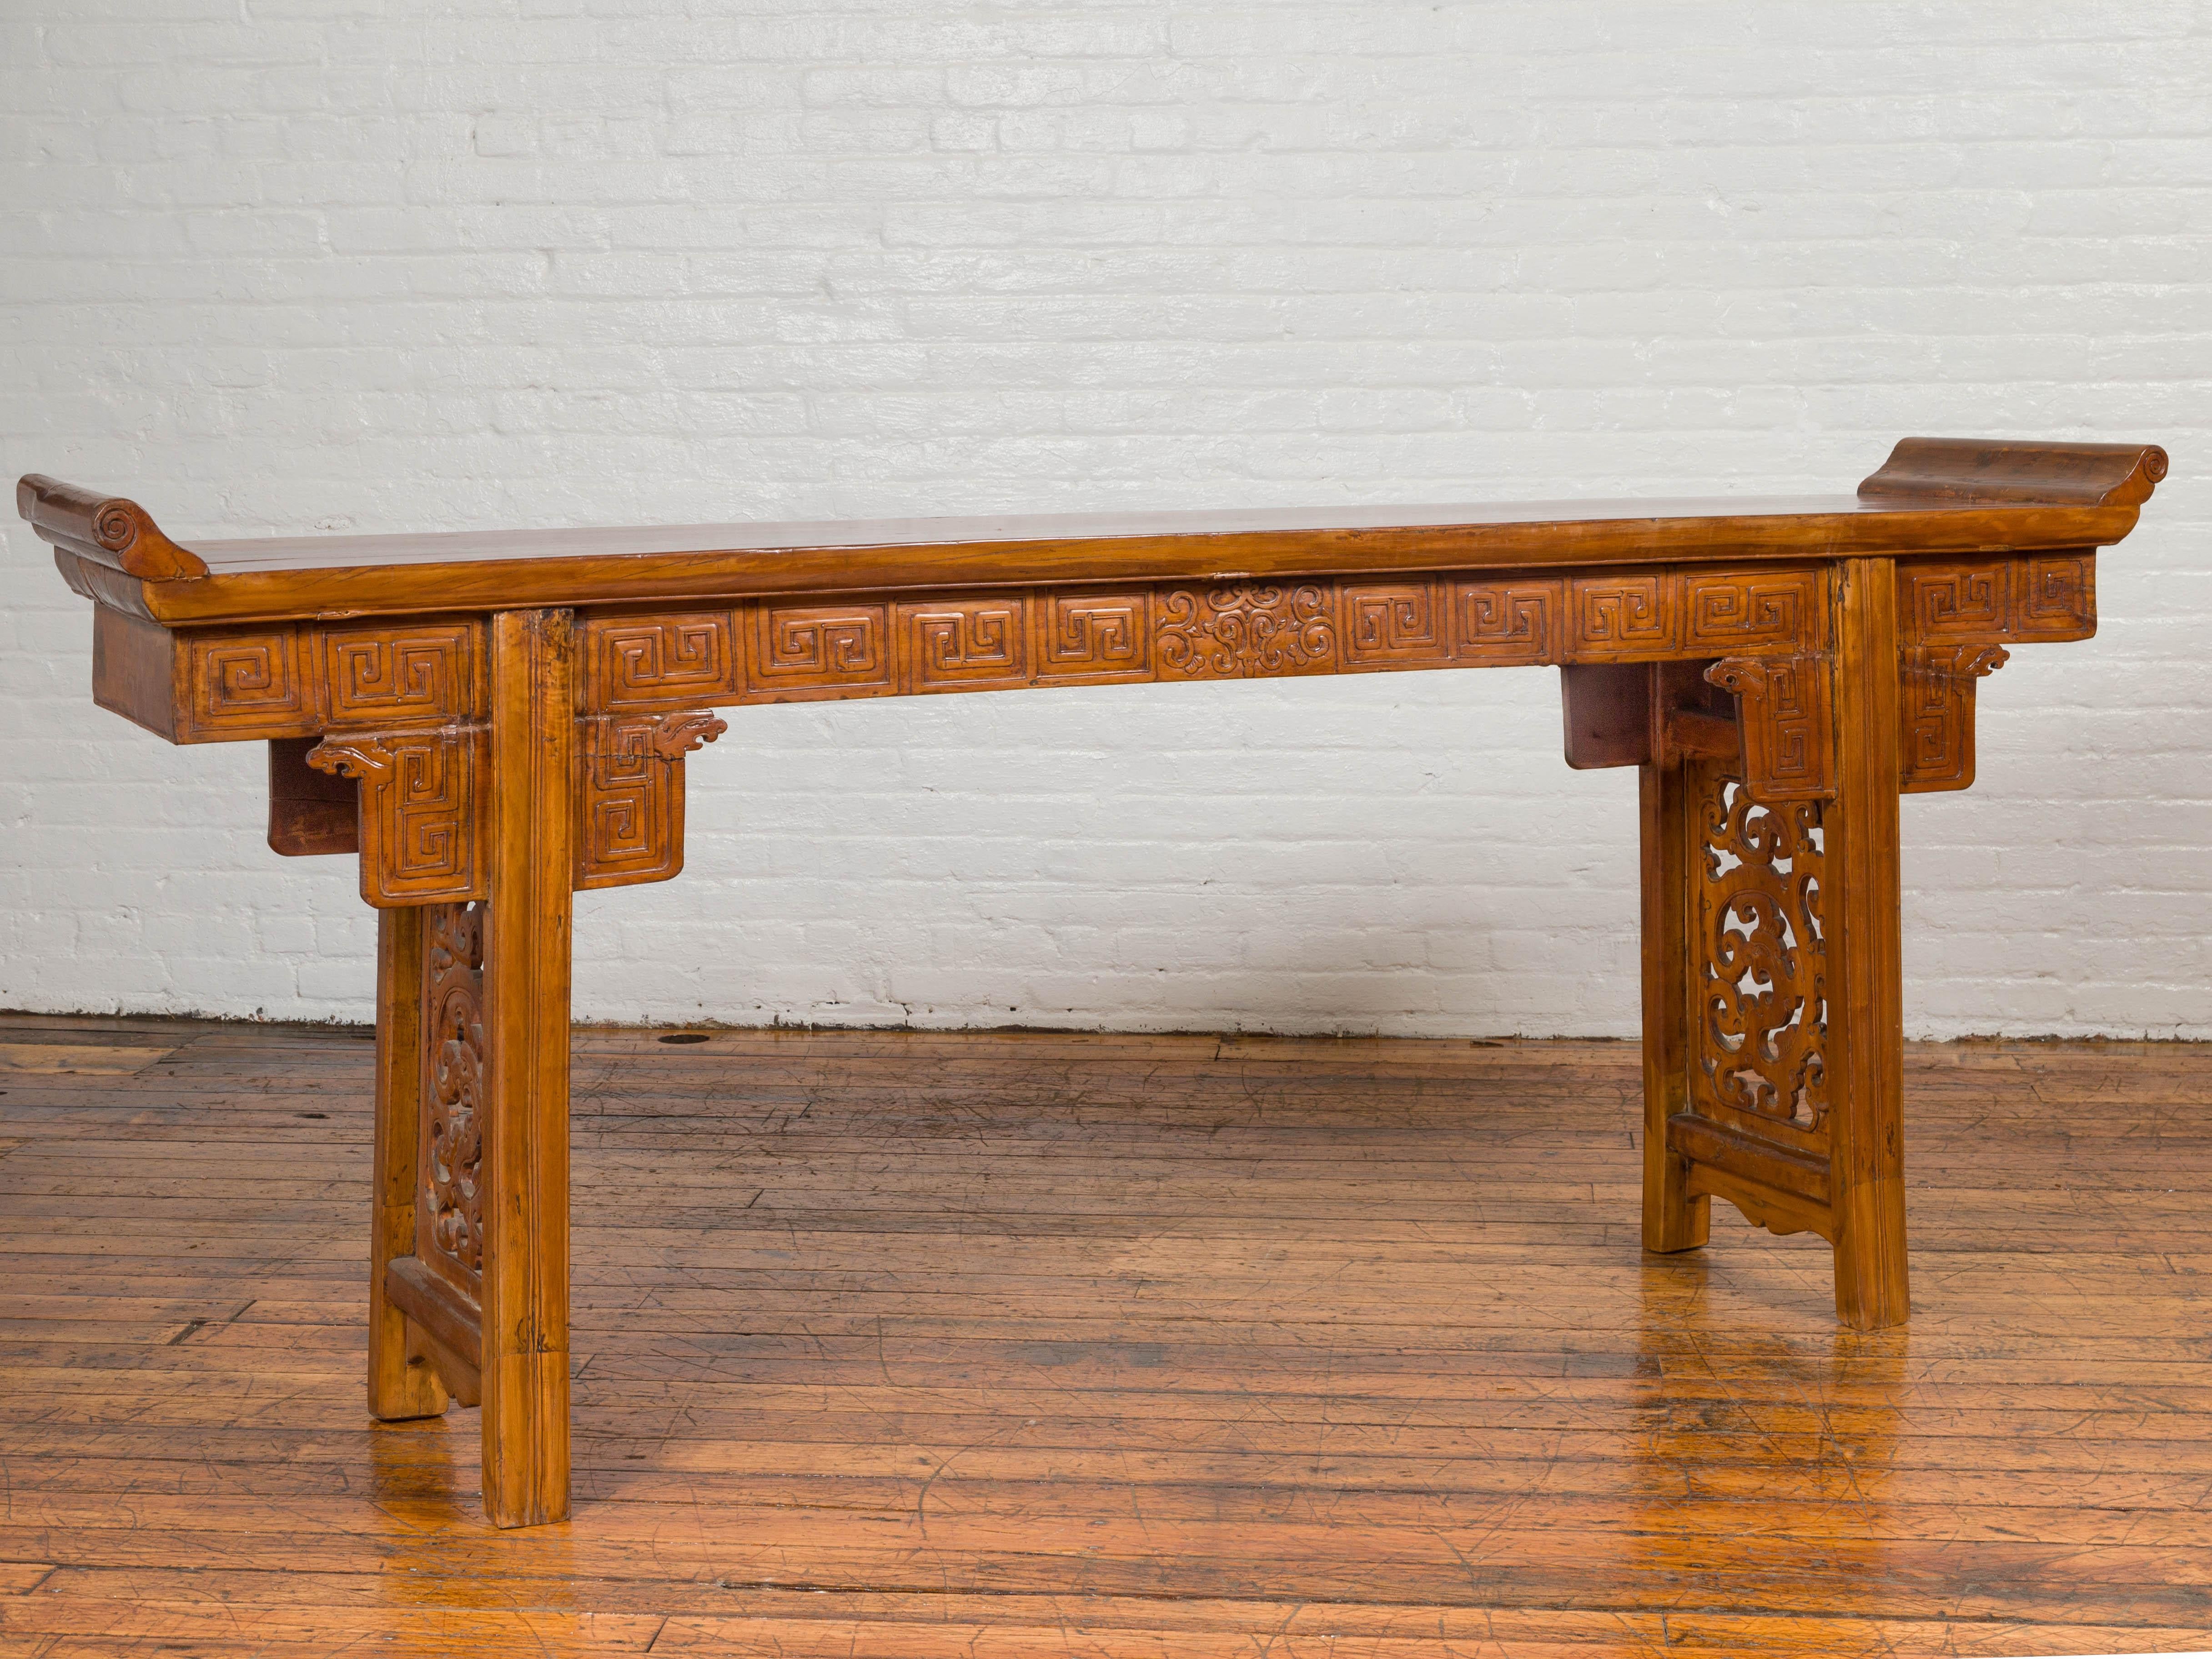 A Chinese Ming Dynasty style altar console table with meander-carved apron, everted flanges and cloud motifs. Attracting our attention with its elegant lines and skilfully carved décor, this Chinese Ming Dynasty style console altar table features a